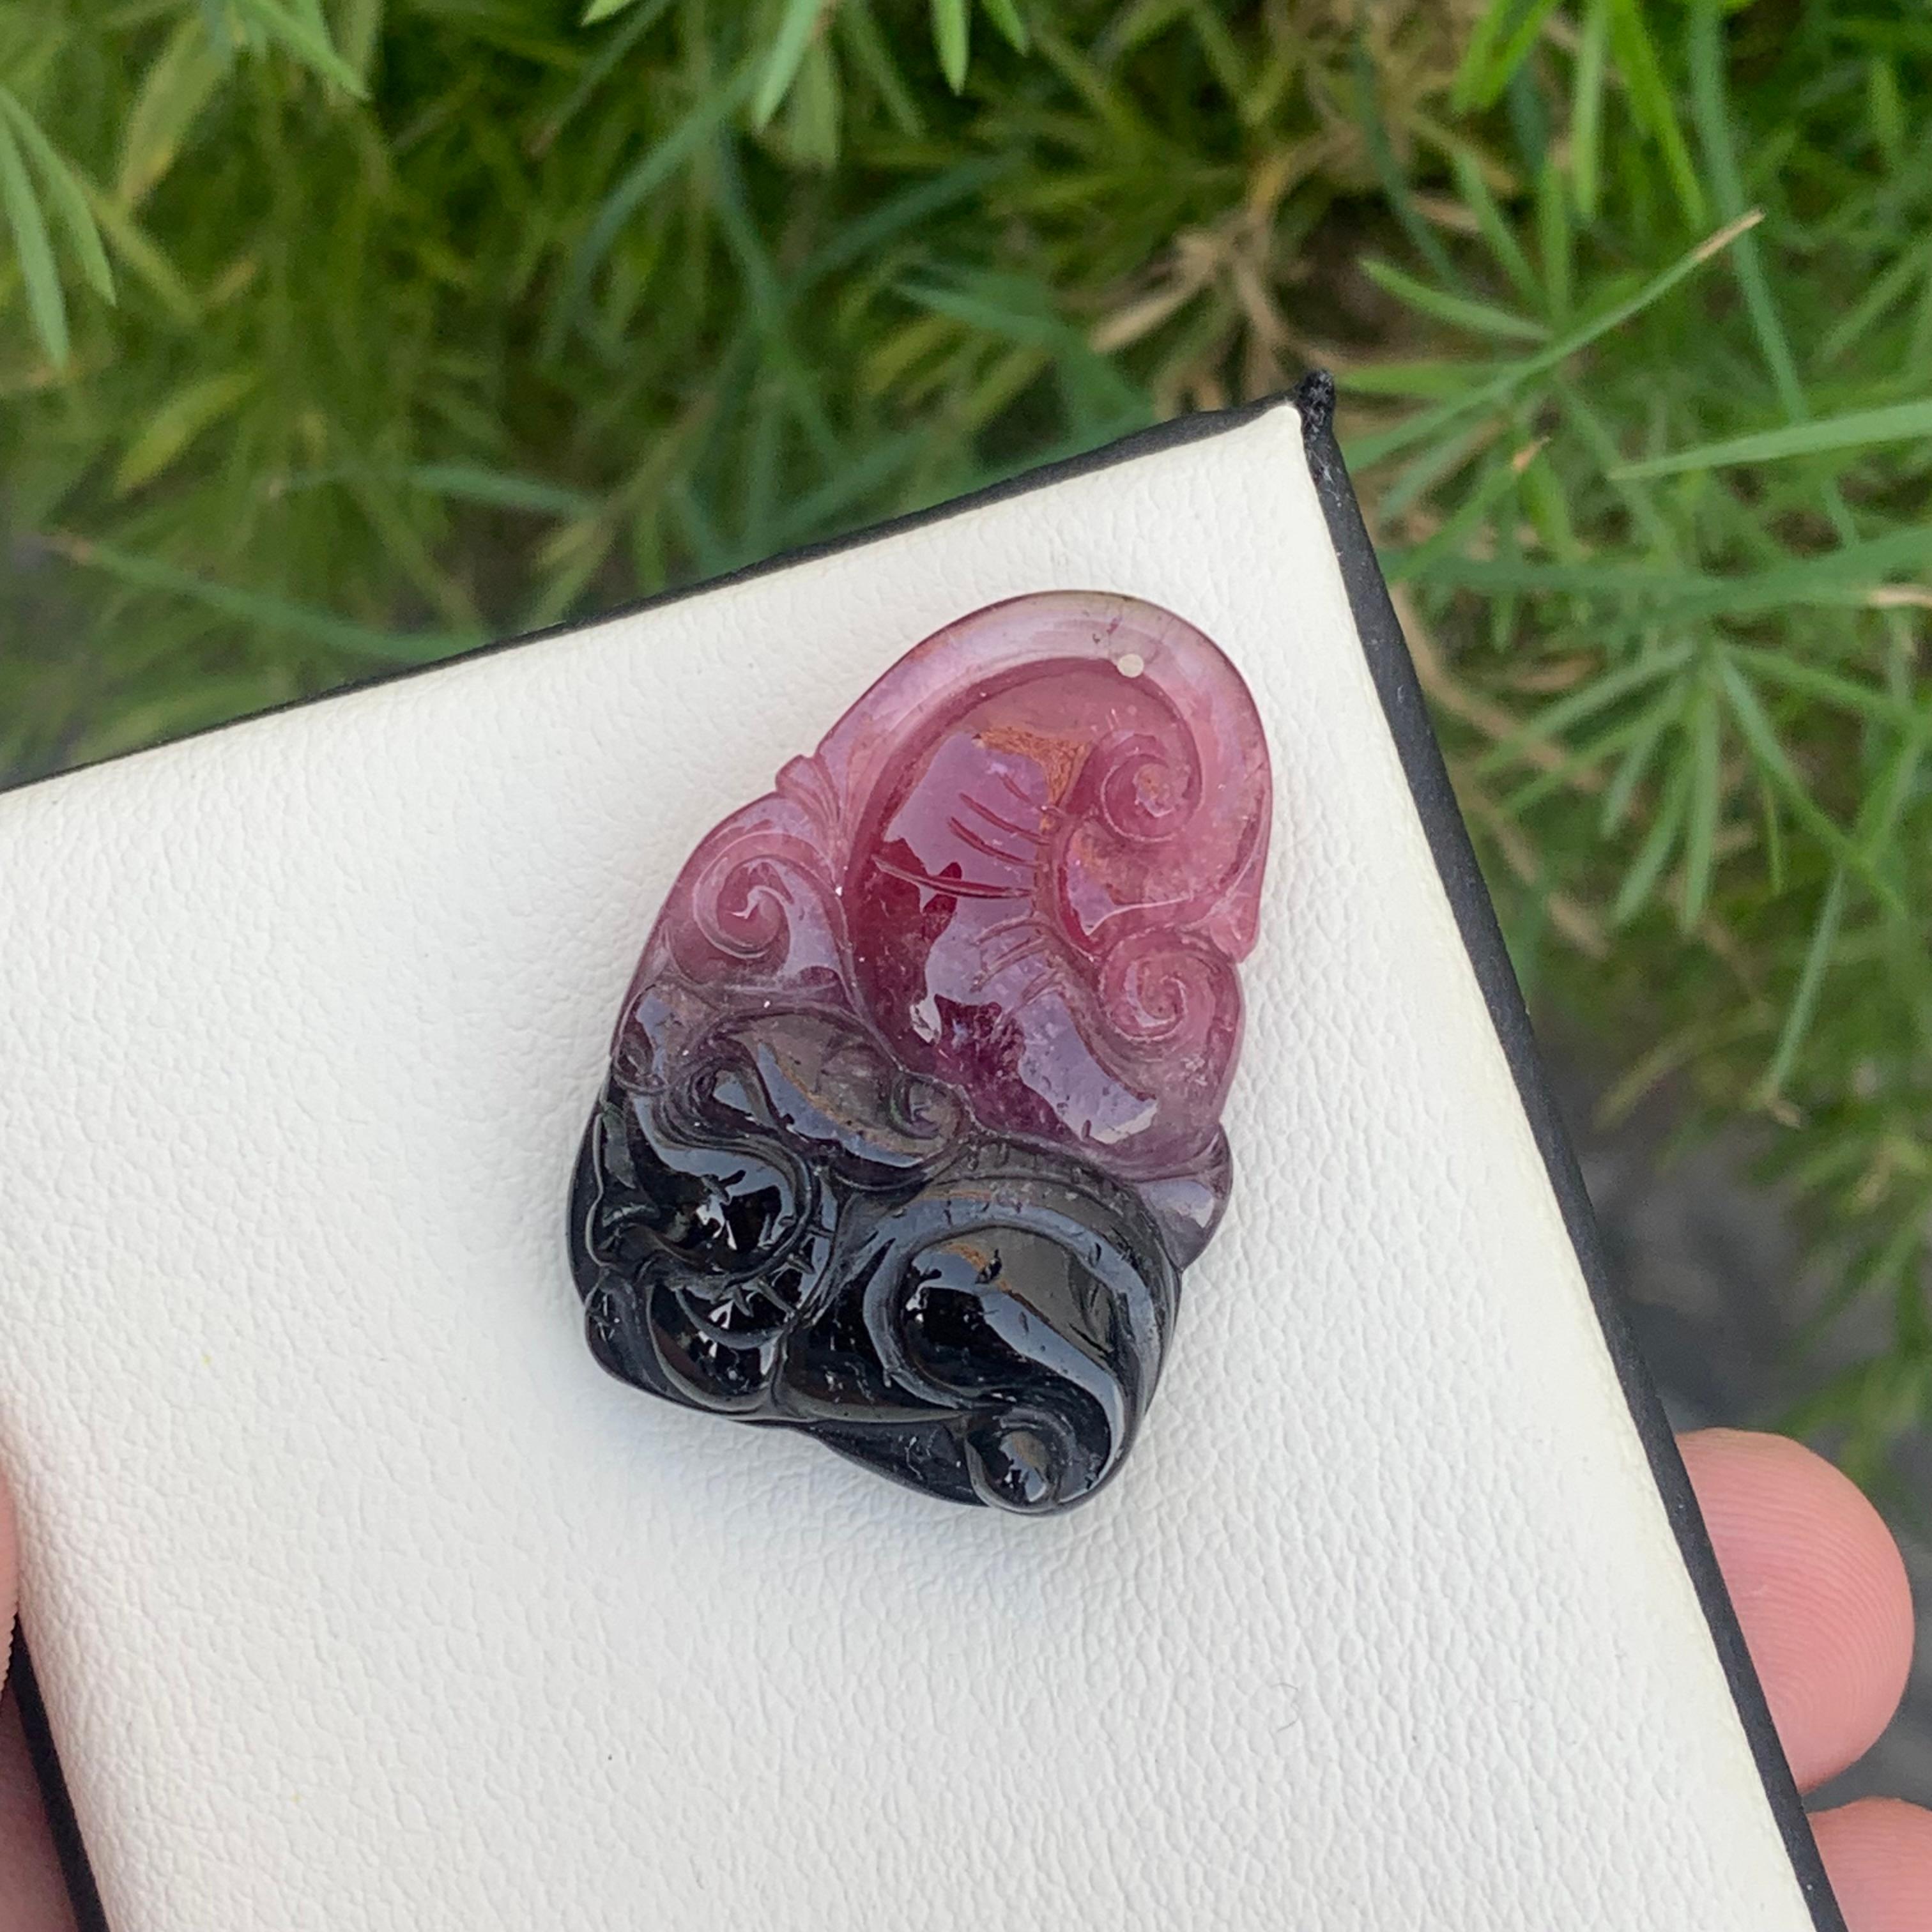 Carved 46.55 Carat Stunning Bi Color Drilled Tourmaline Carving from Madagascar Africa For Sale